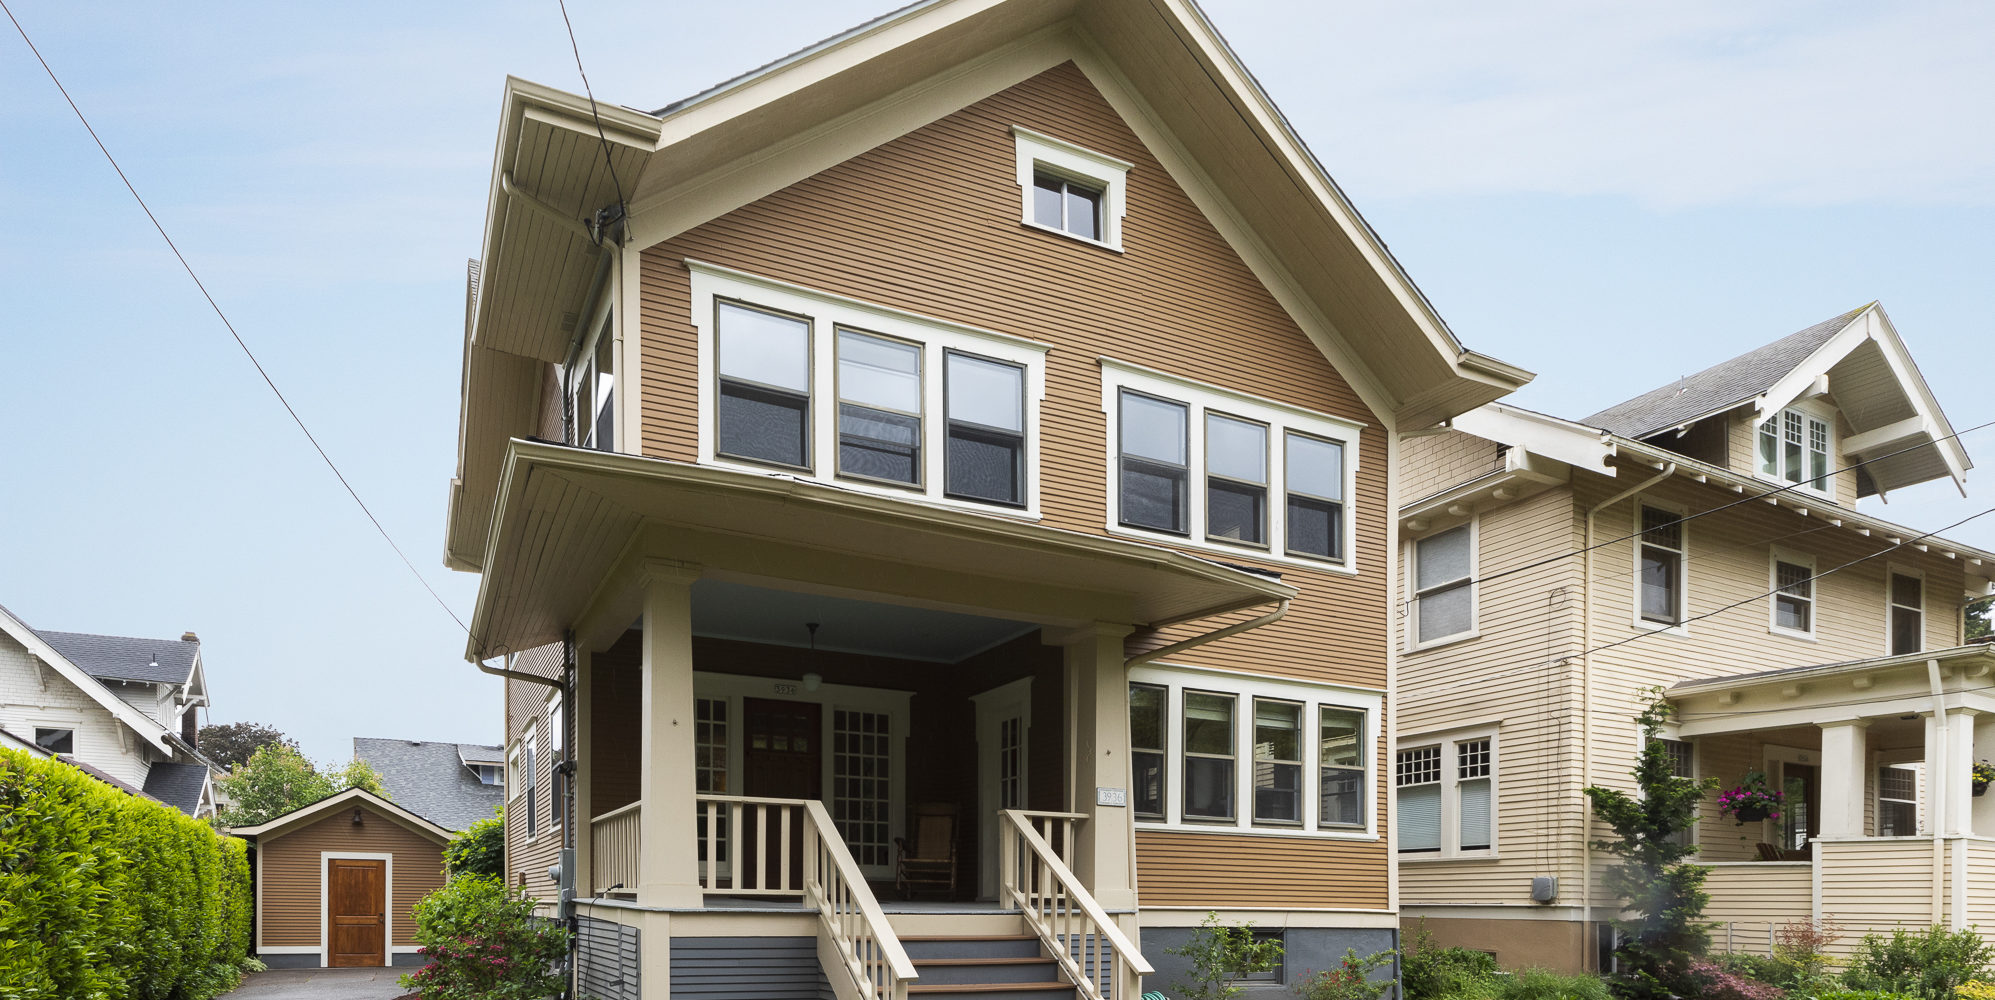 In the heart of Alameda, this Stately Old Portland Home Shines